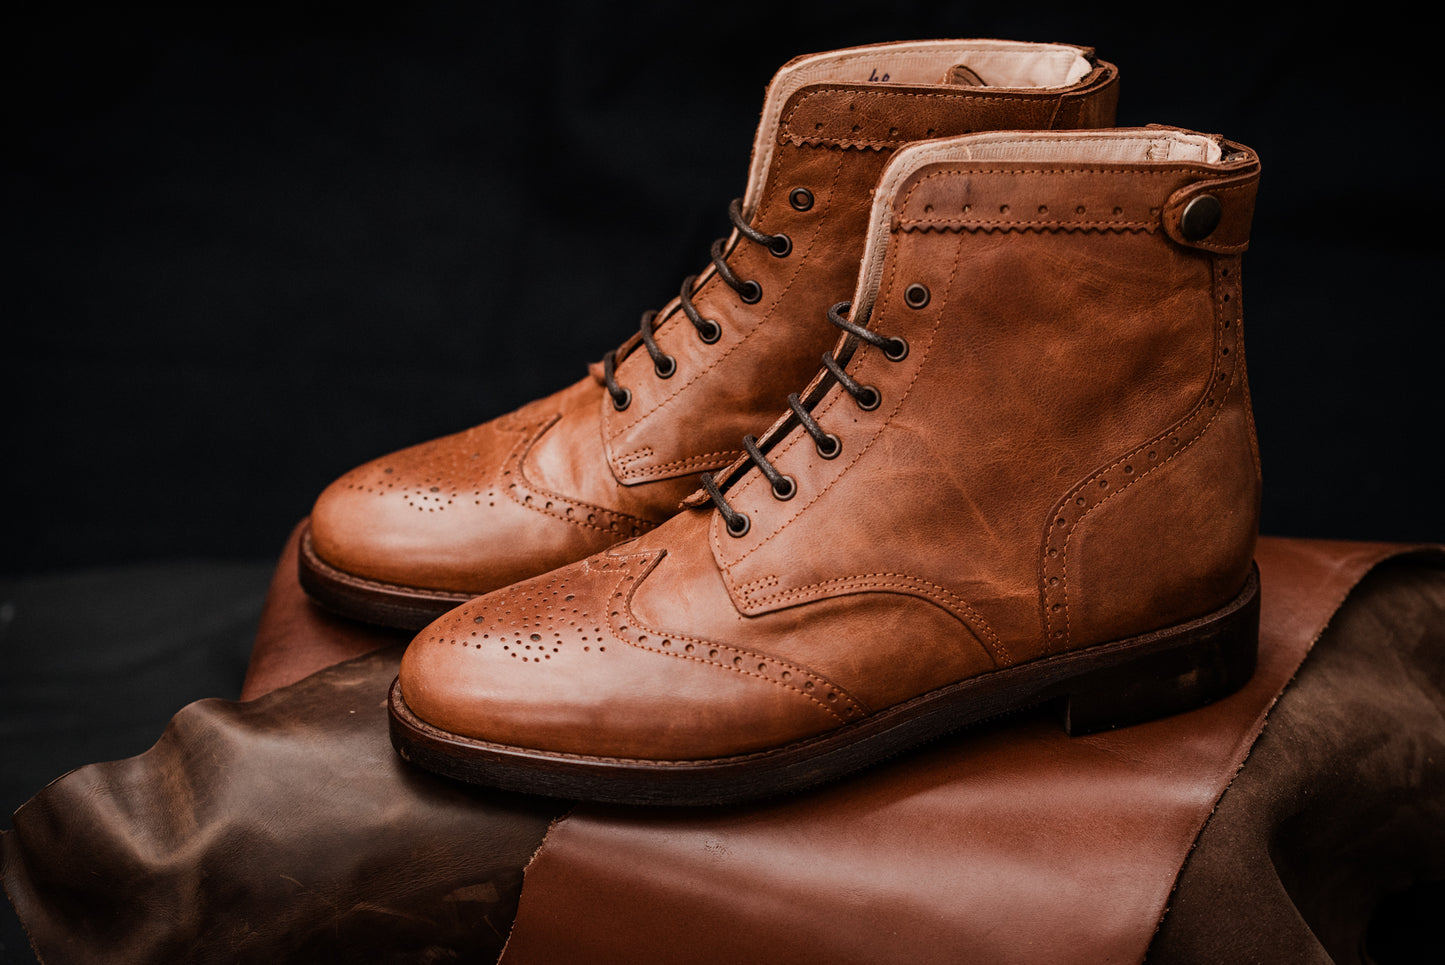 Guadiana Boots - OldMulla - Boots Store, Handmade By George Family